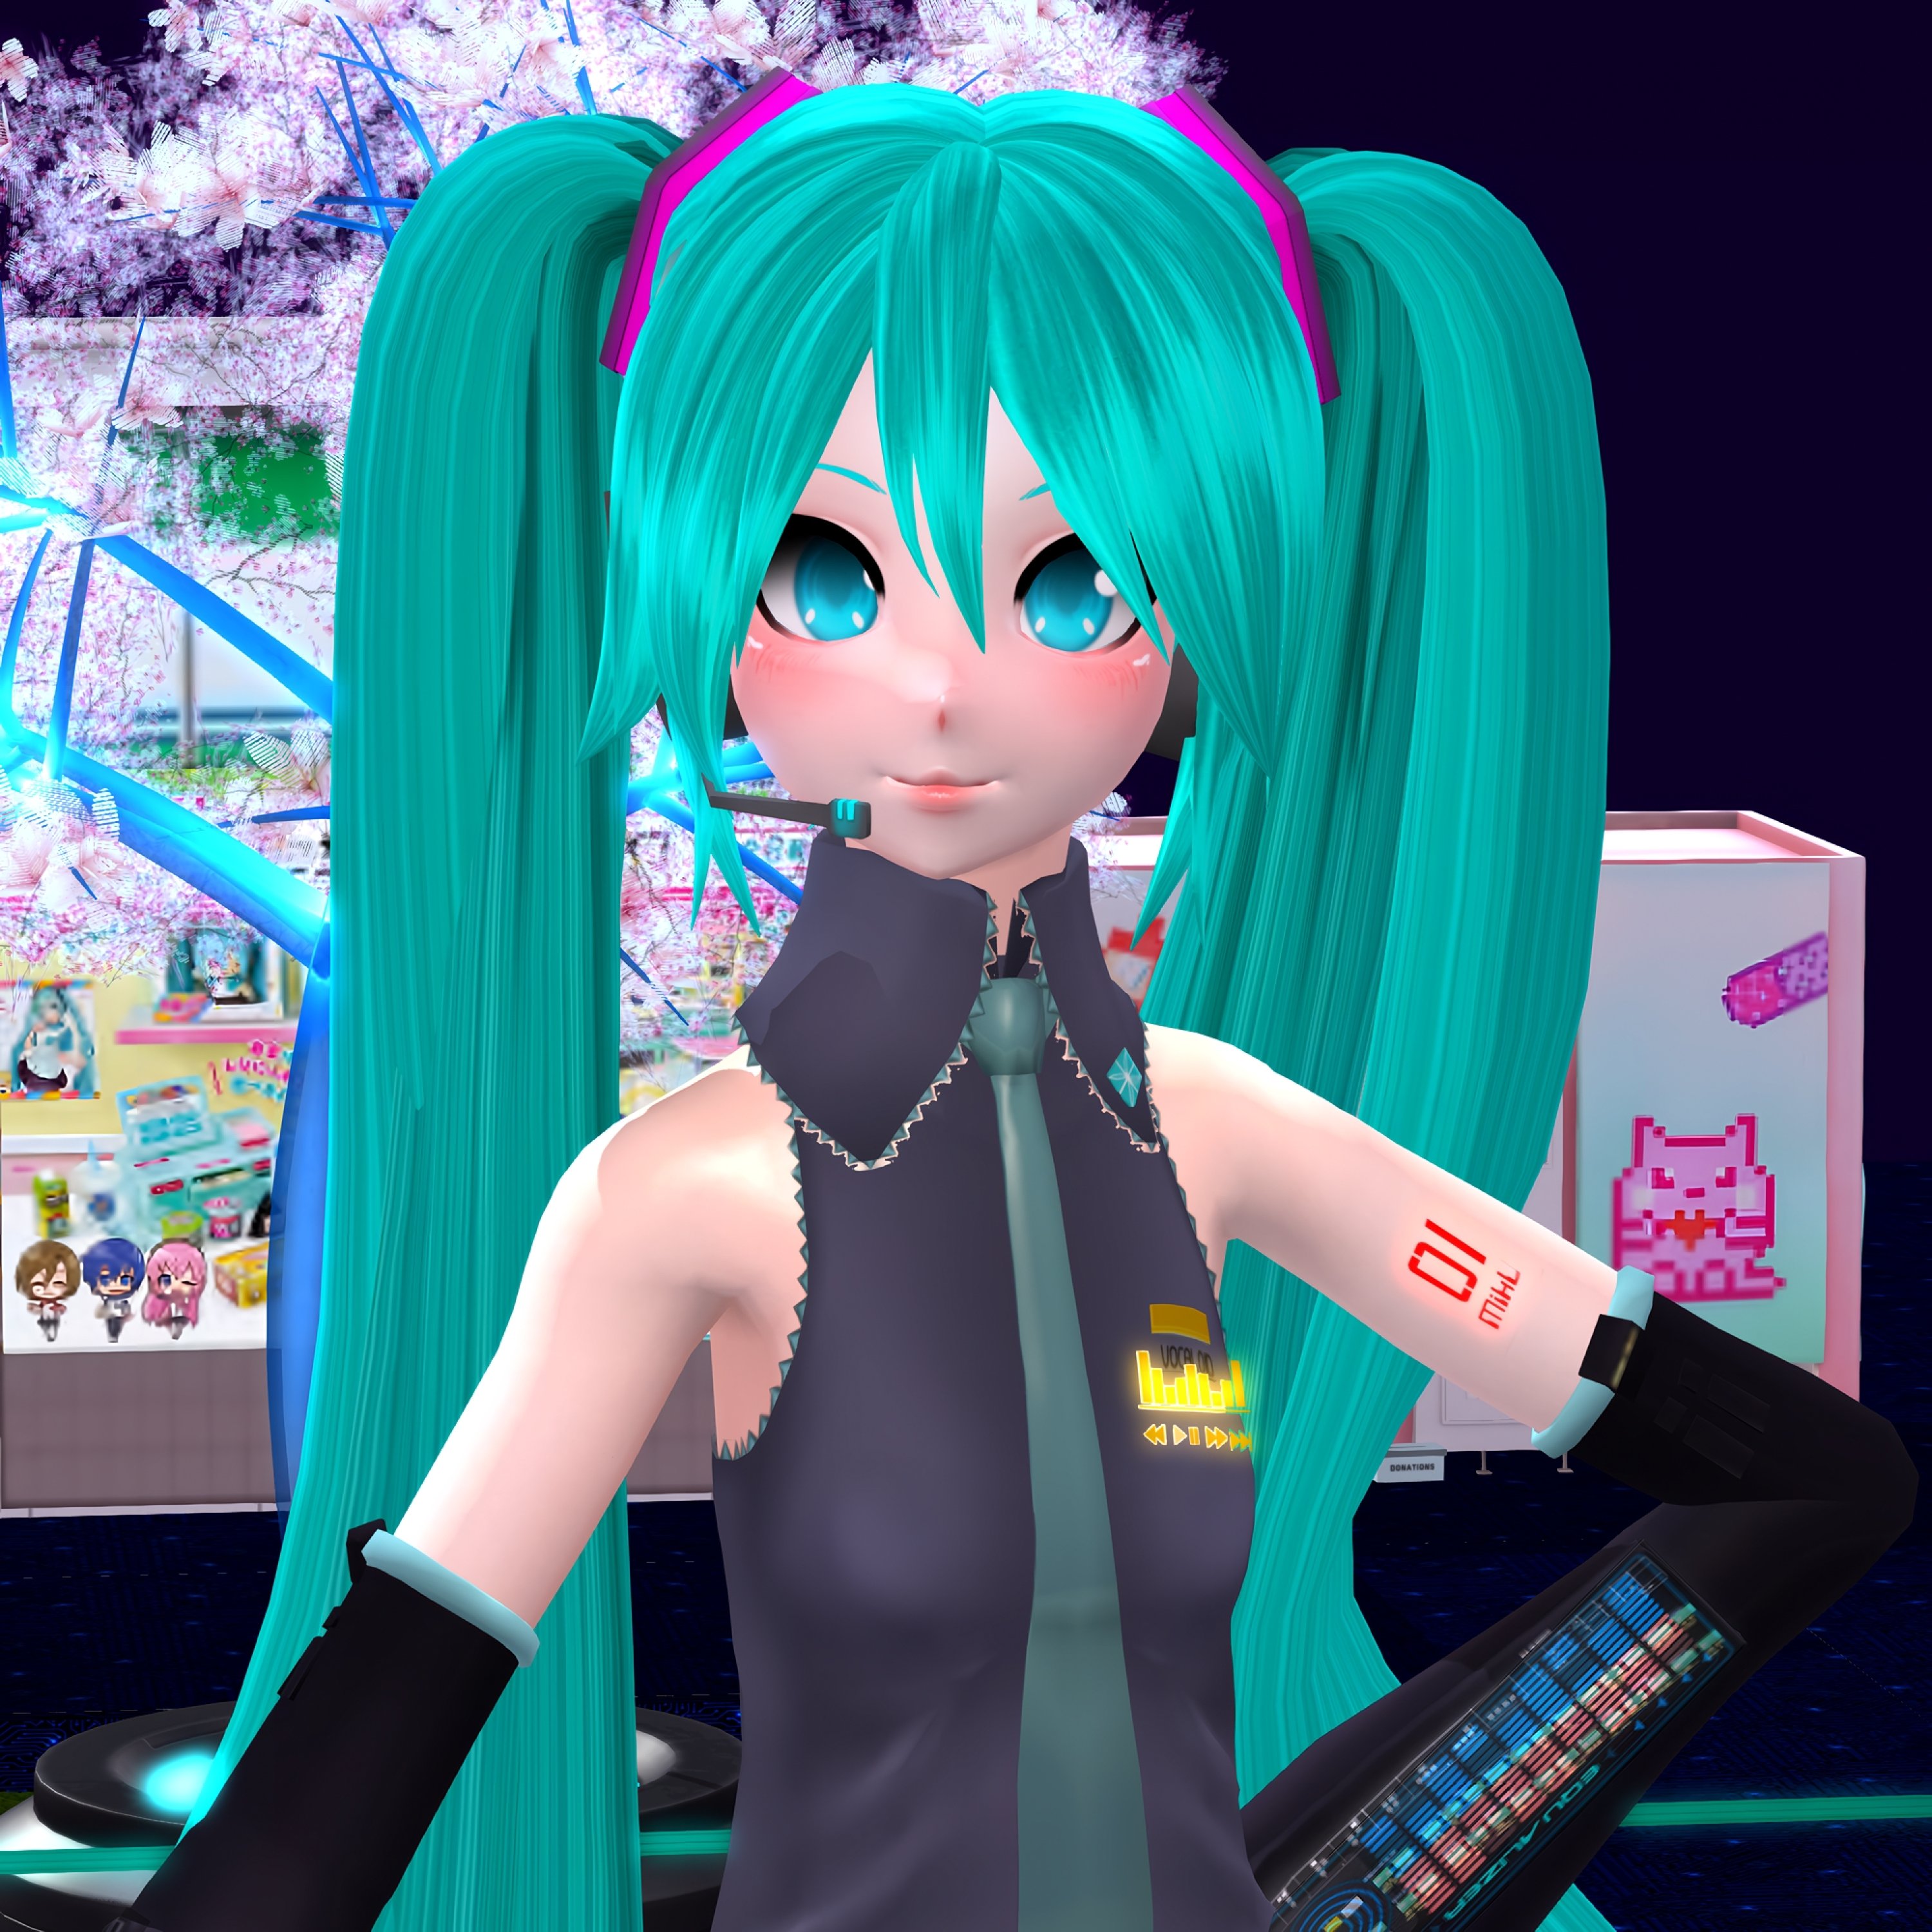 Hatsune Miku Official in Second Life